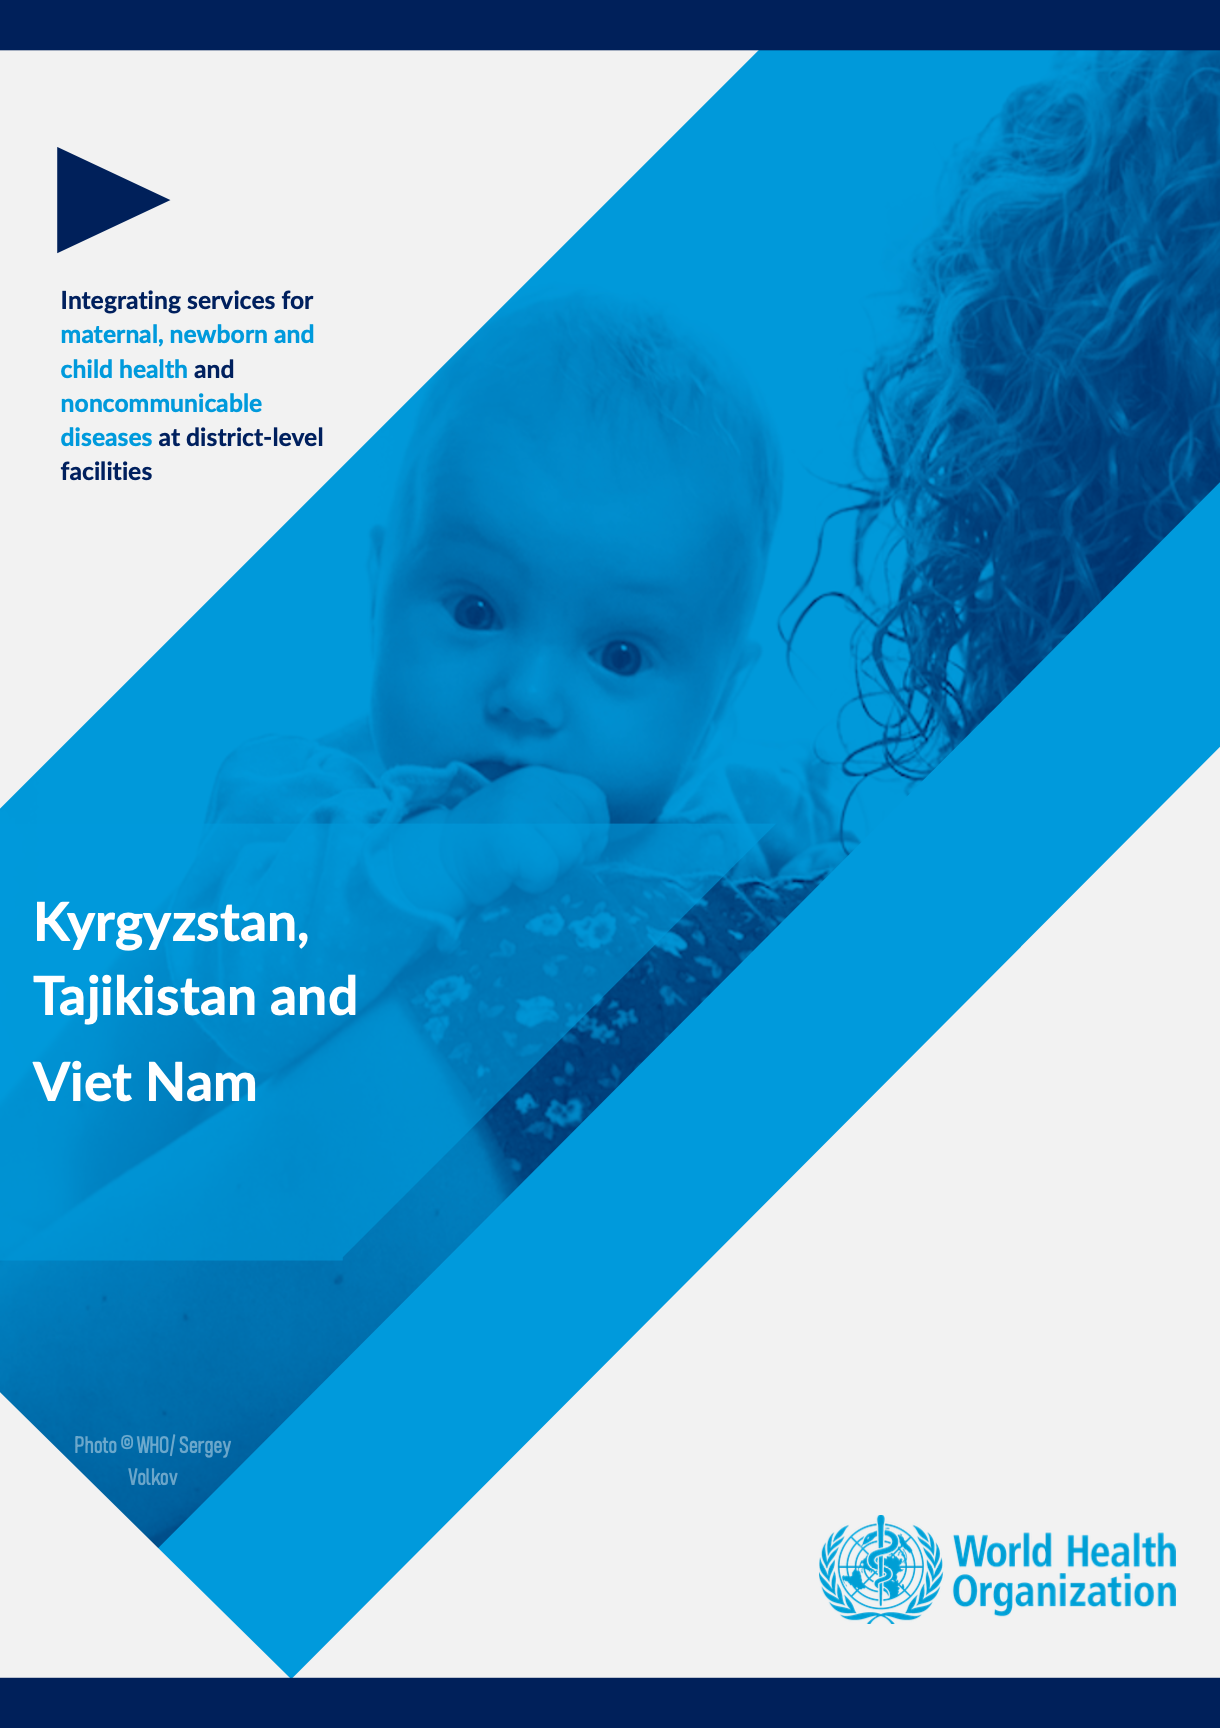 Integrating services for maternal, newborn and child health and noncommunicable diseases at district-level facilities: Kyrgyzstan, Tajikistan and Viet Nam